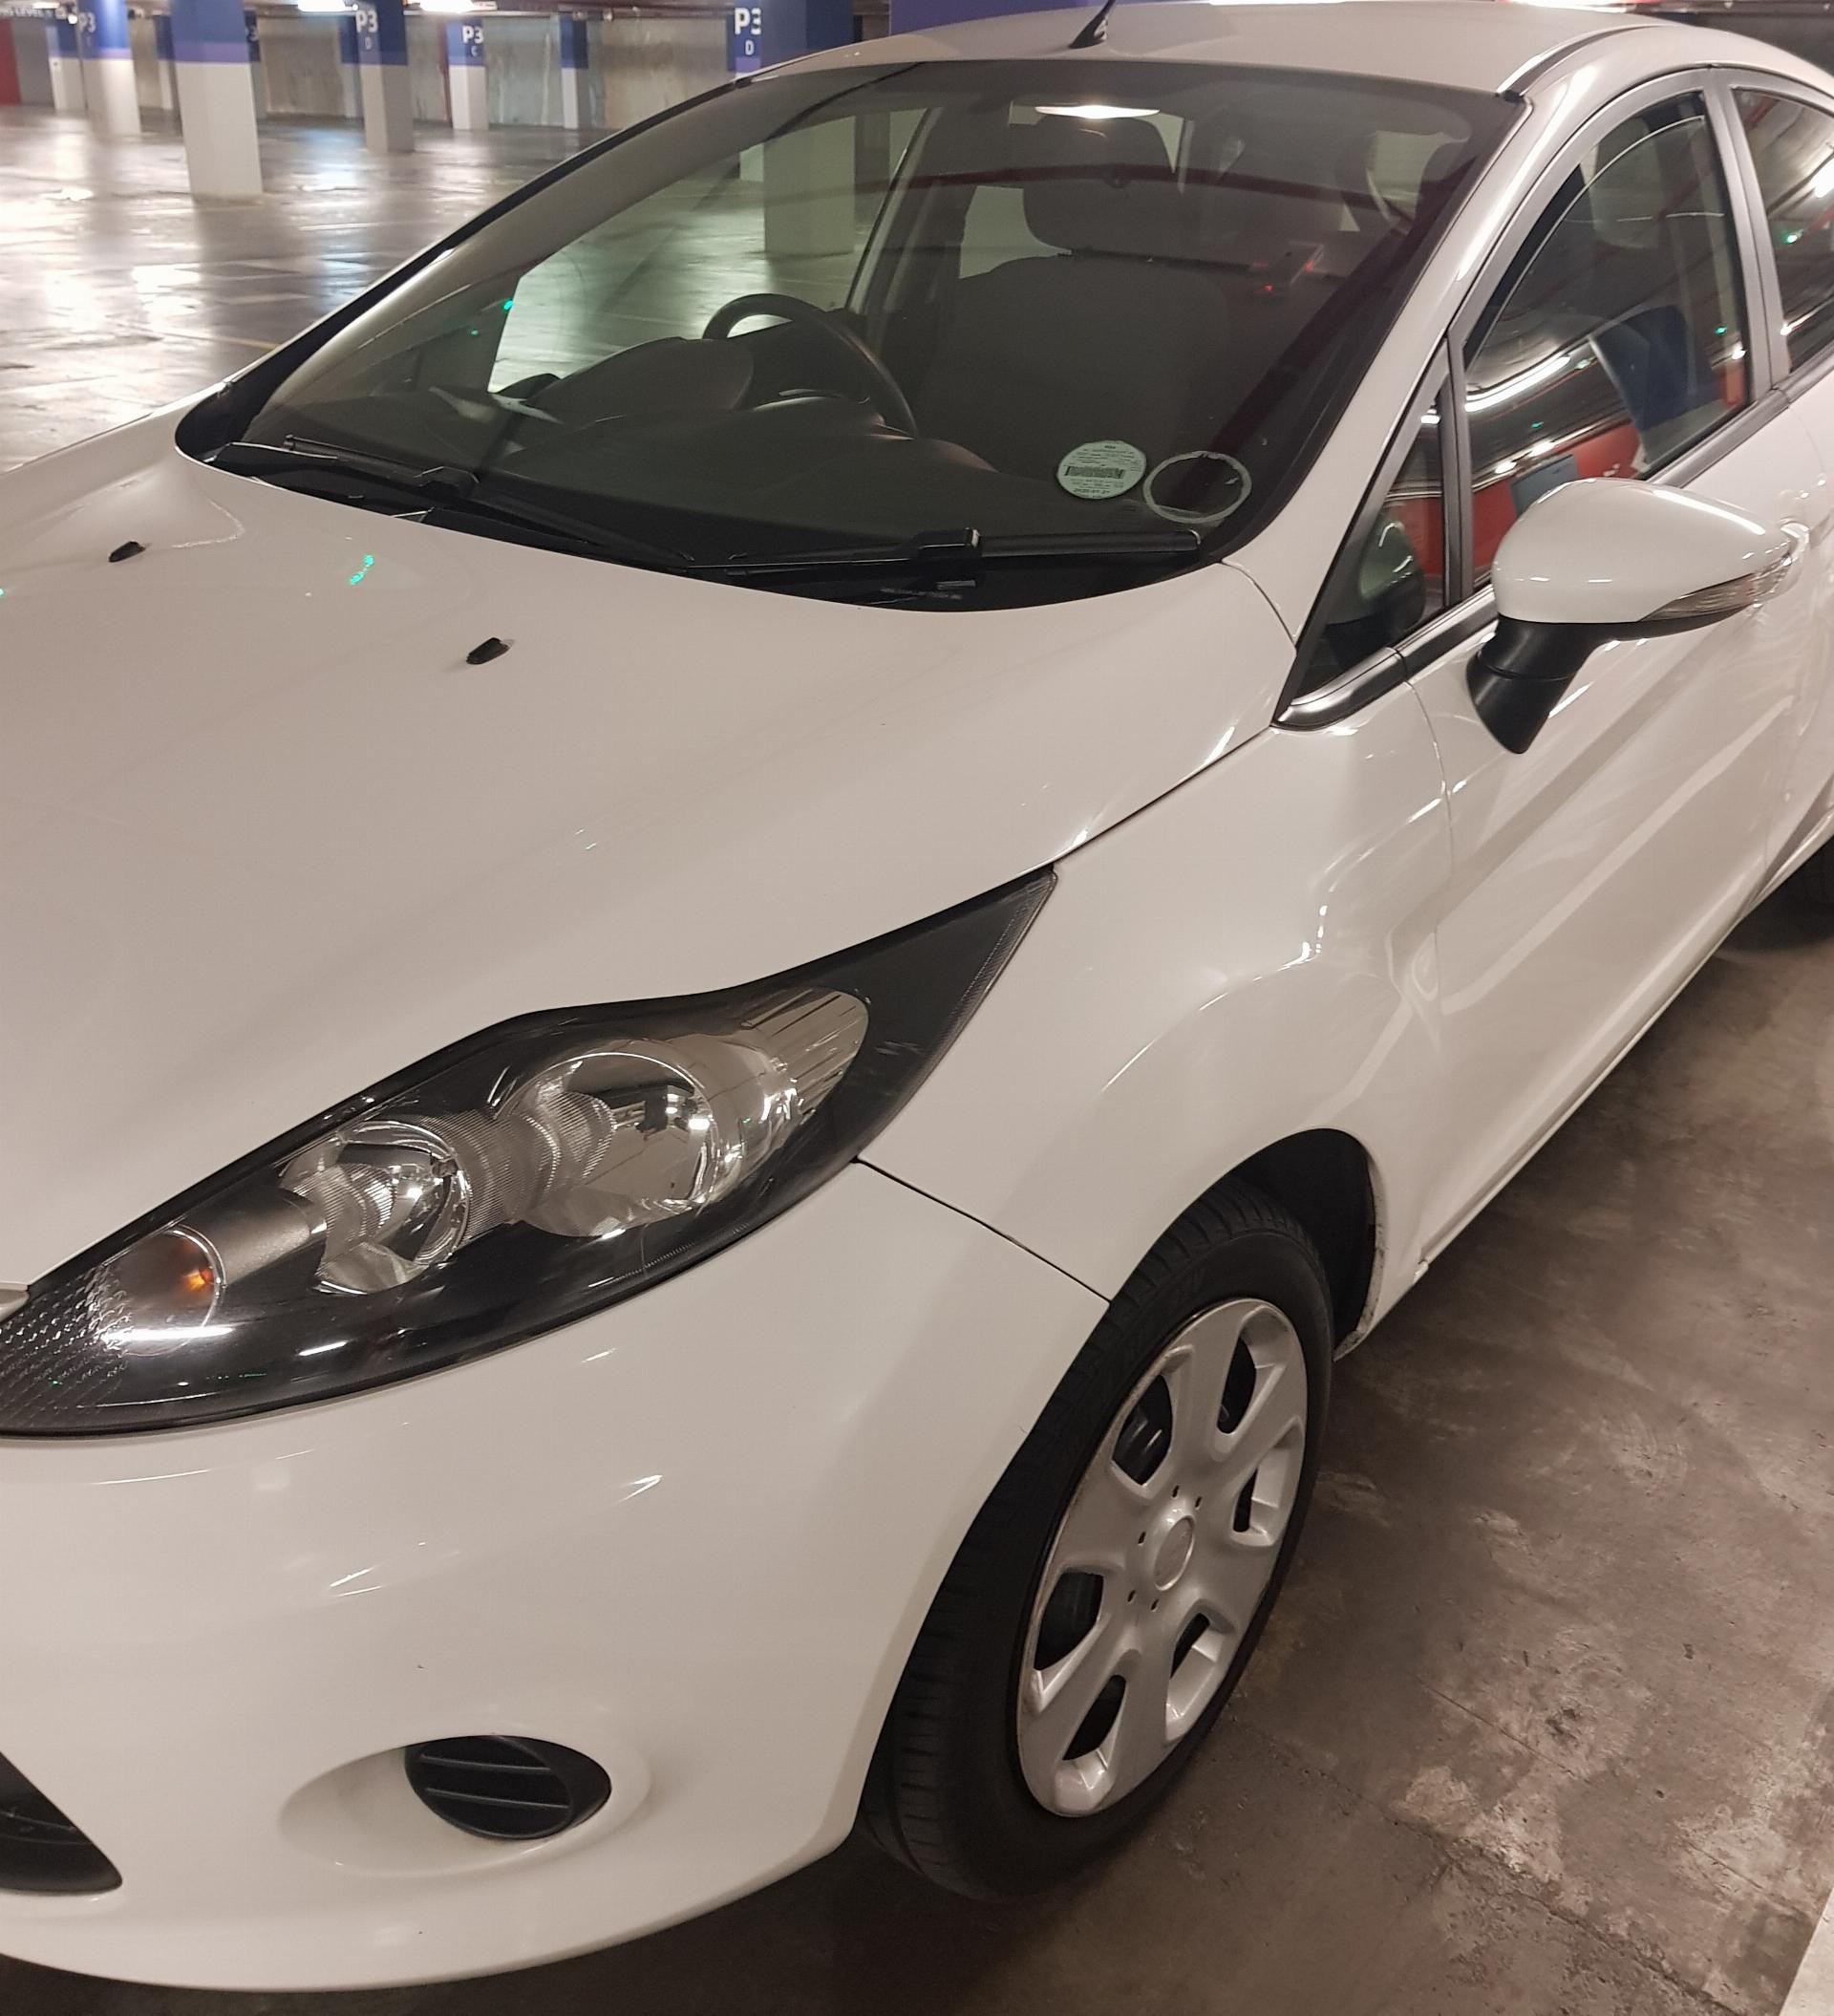 Ford Fiesta 1.4 Colour Coated Handles